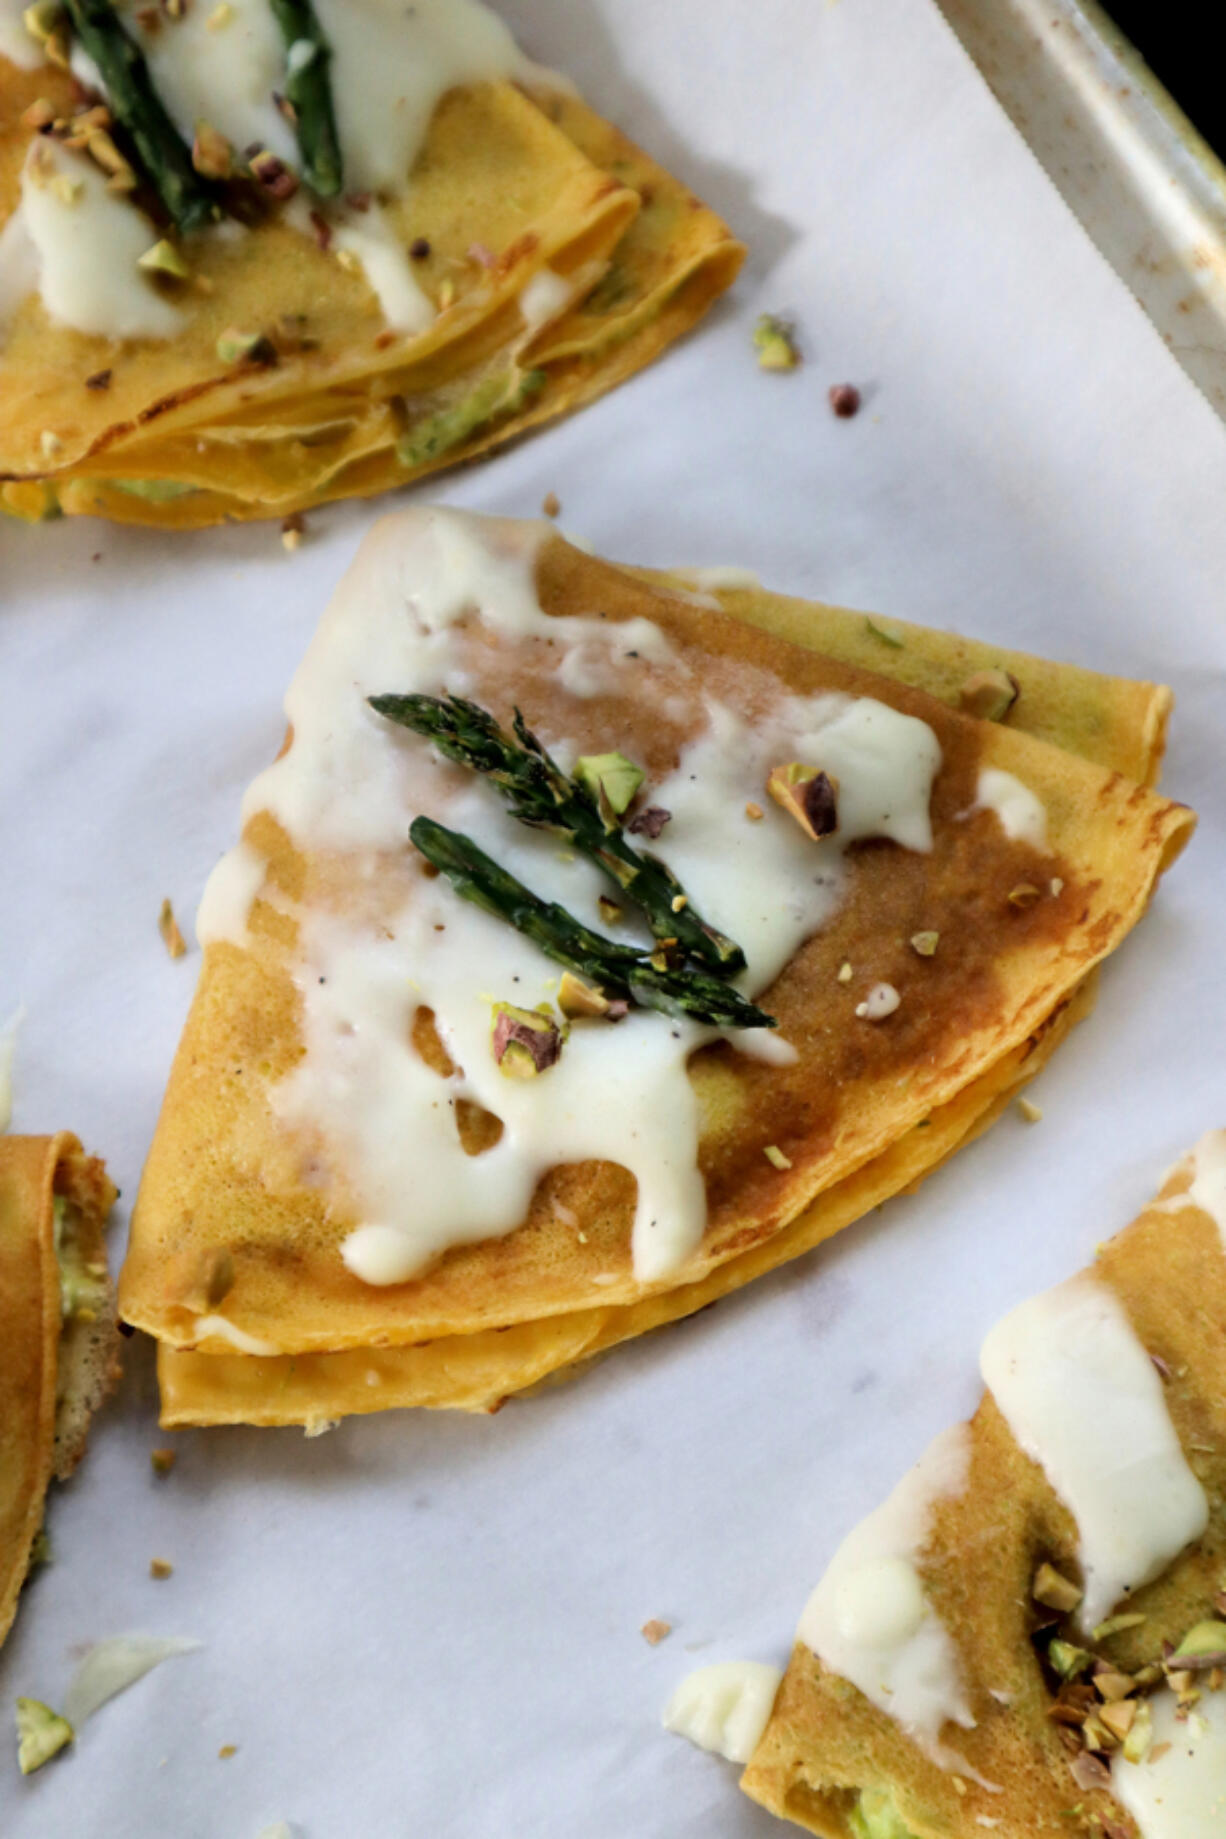 Pureed asparagus blended with fresh ricotta is a seasonal filling for these savory crepes.